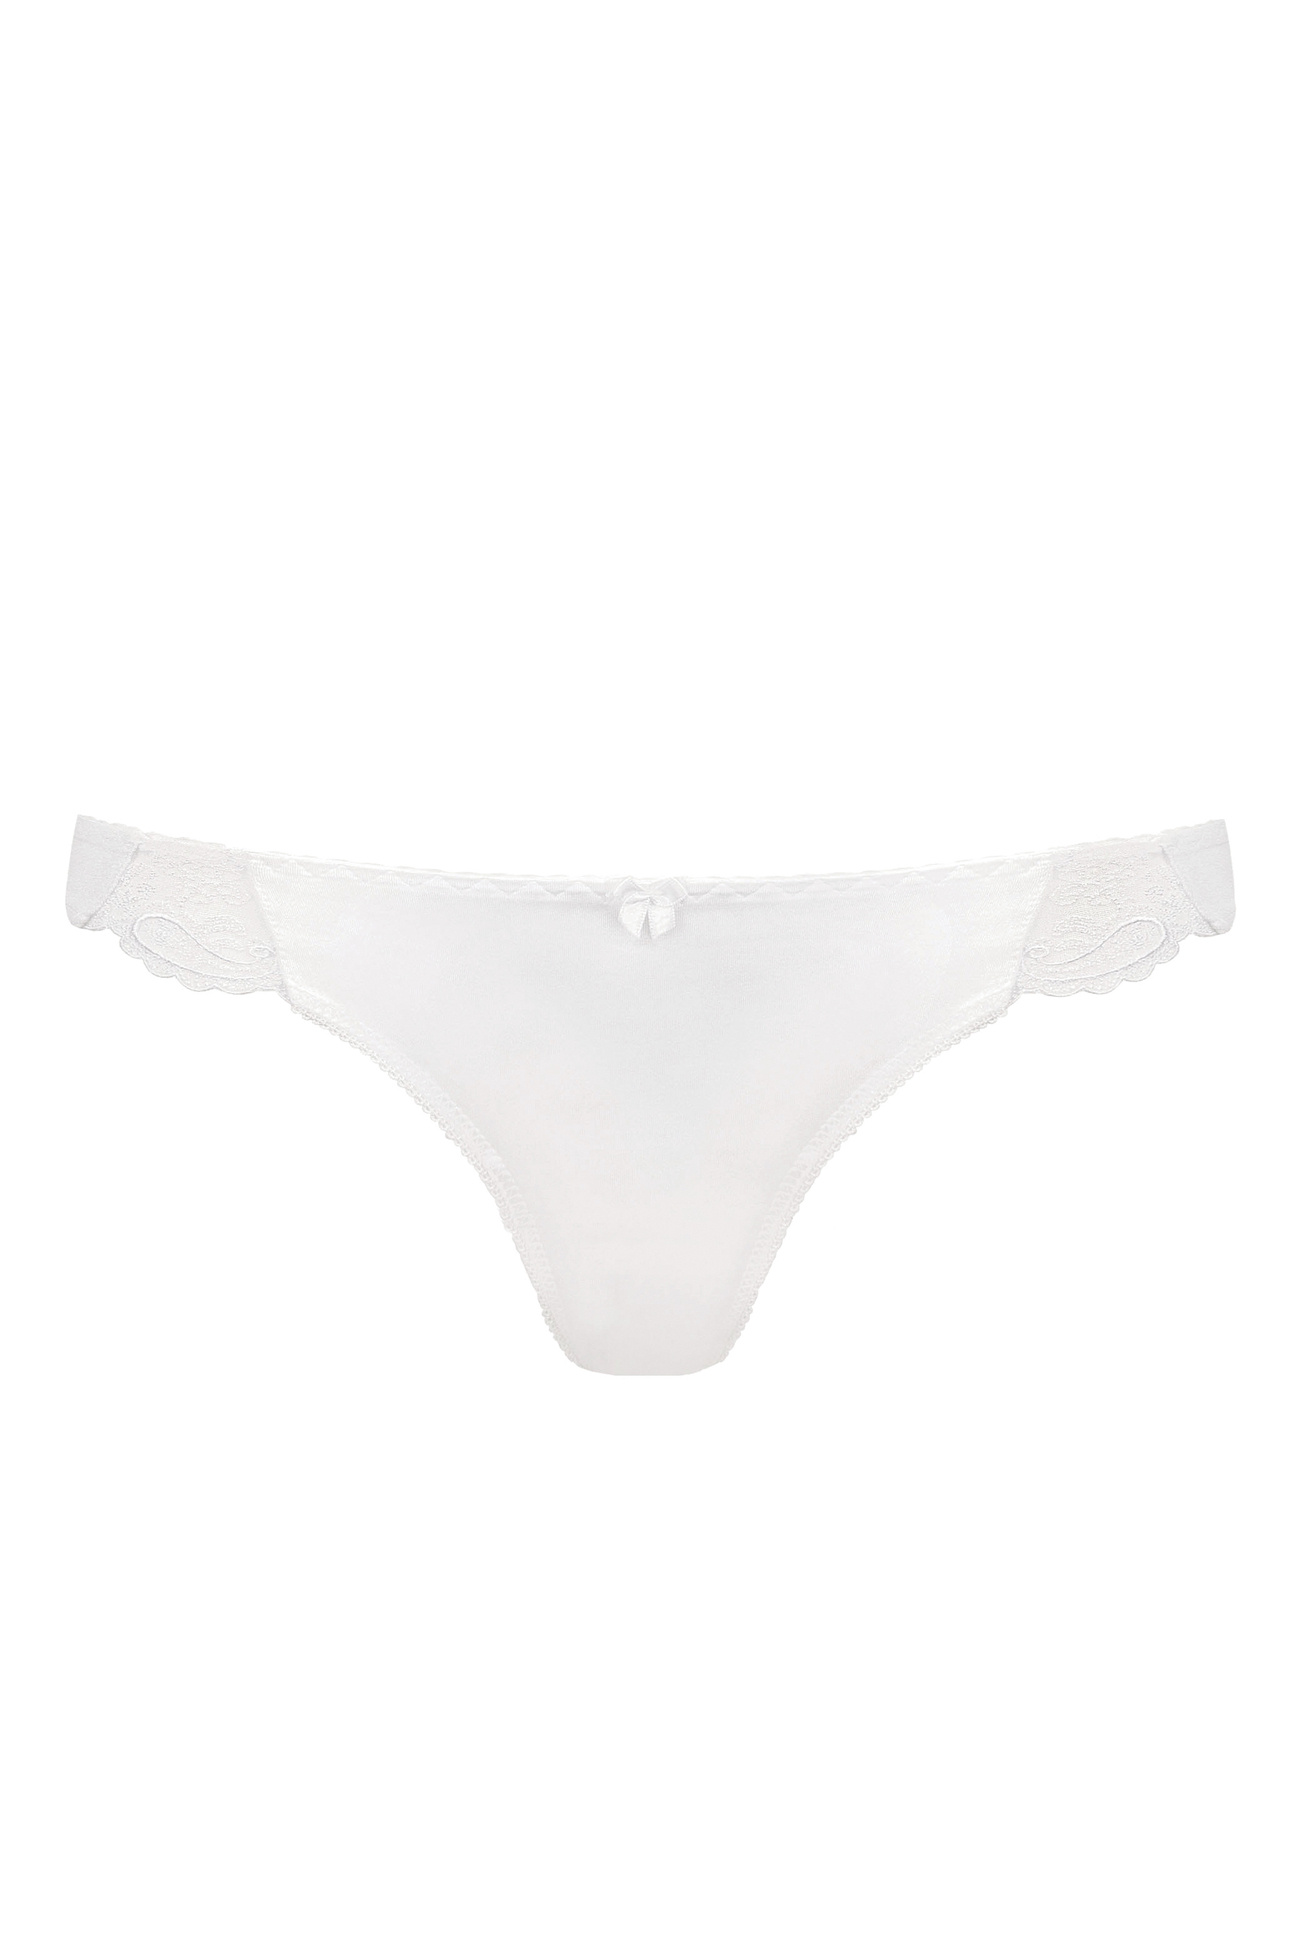 Yvette embroidered thong white